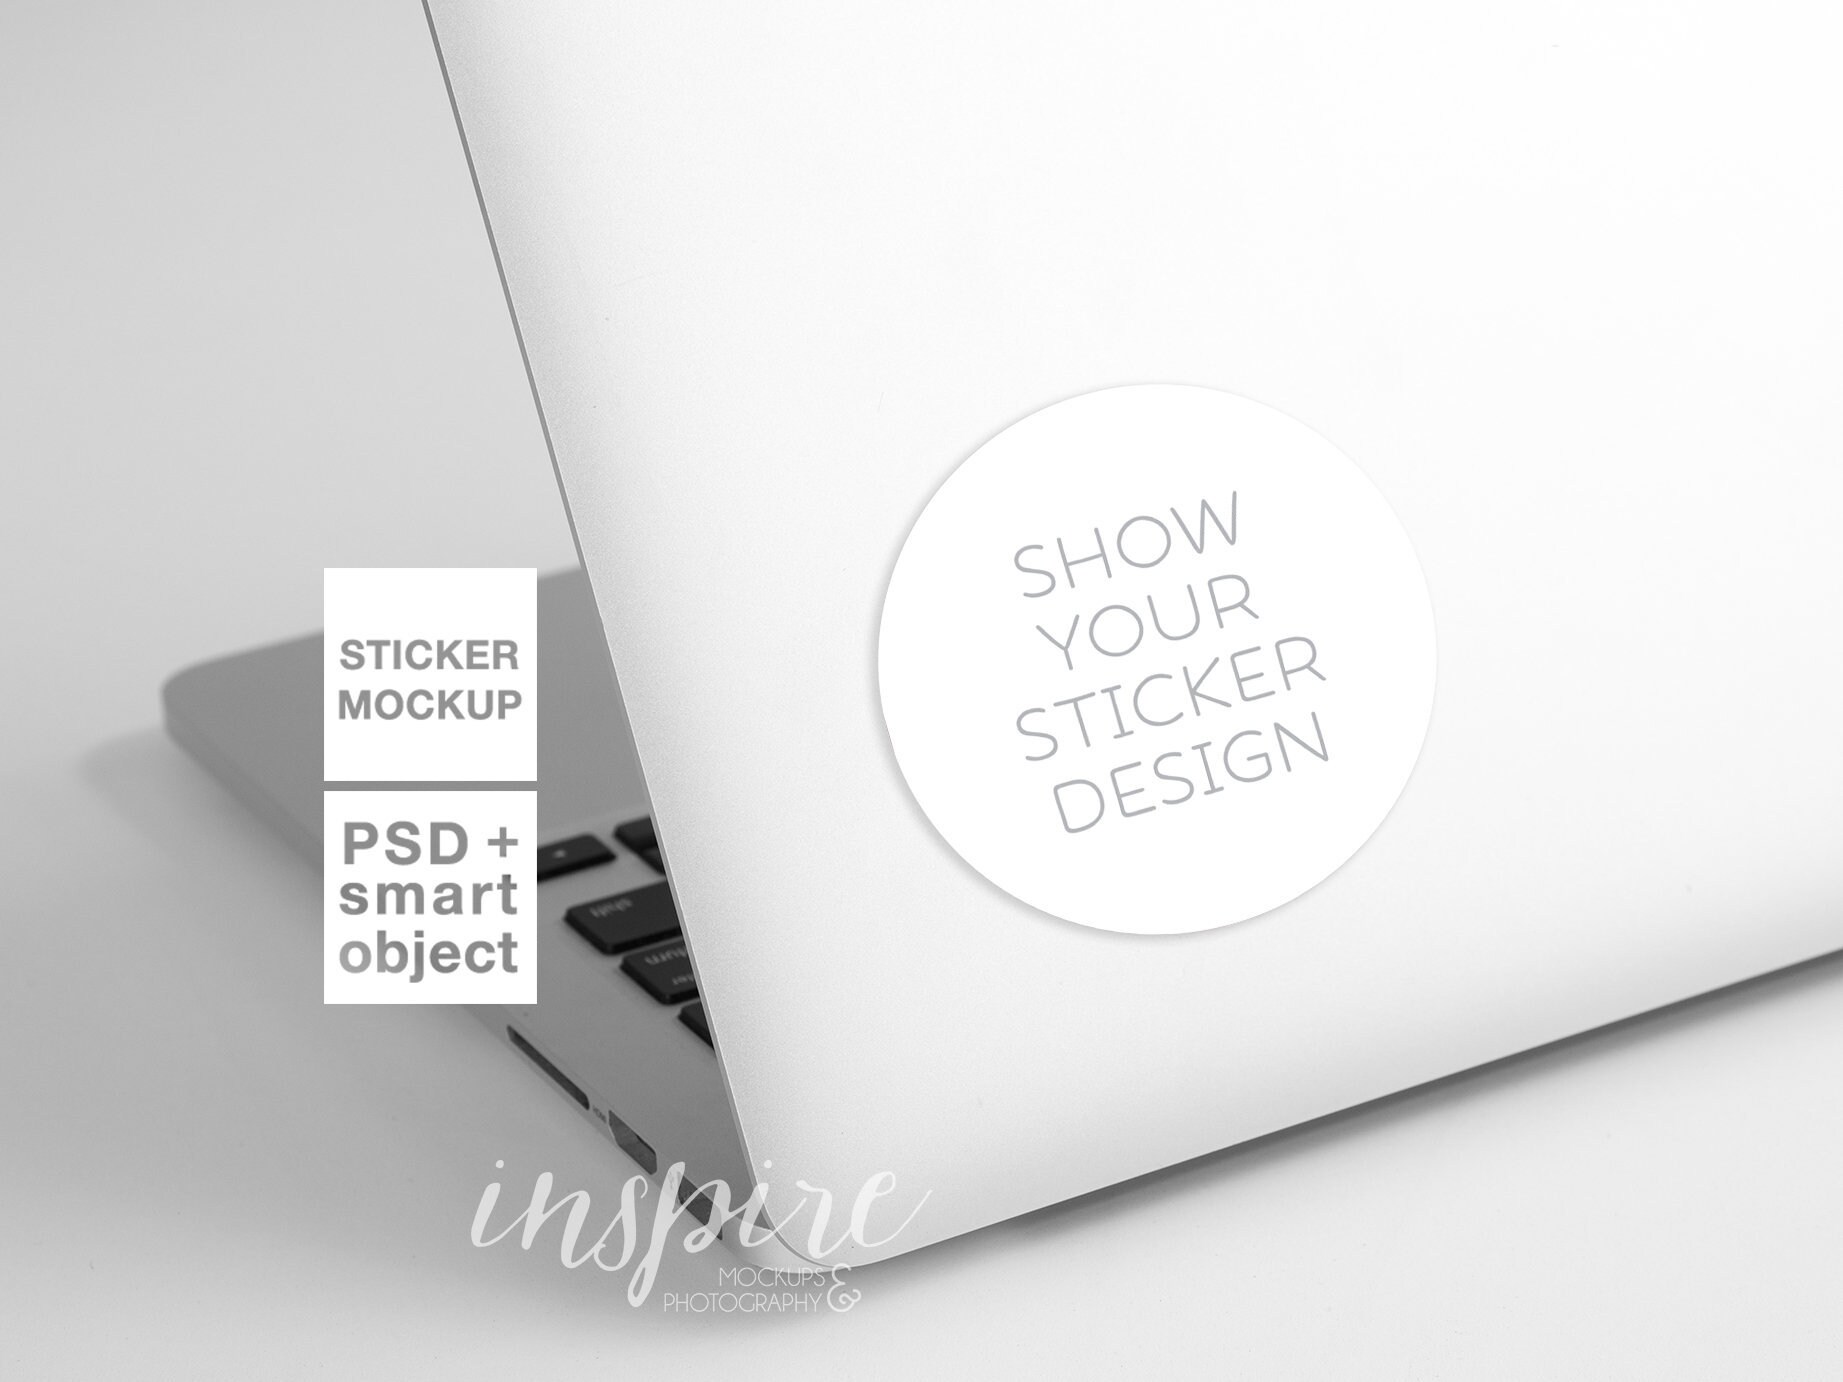 Download Round Vinyl Decal Mockup Laptop Styled Stock Photography For Etsy